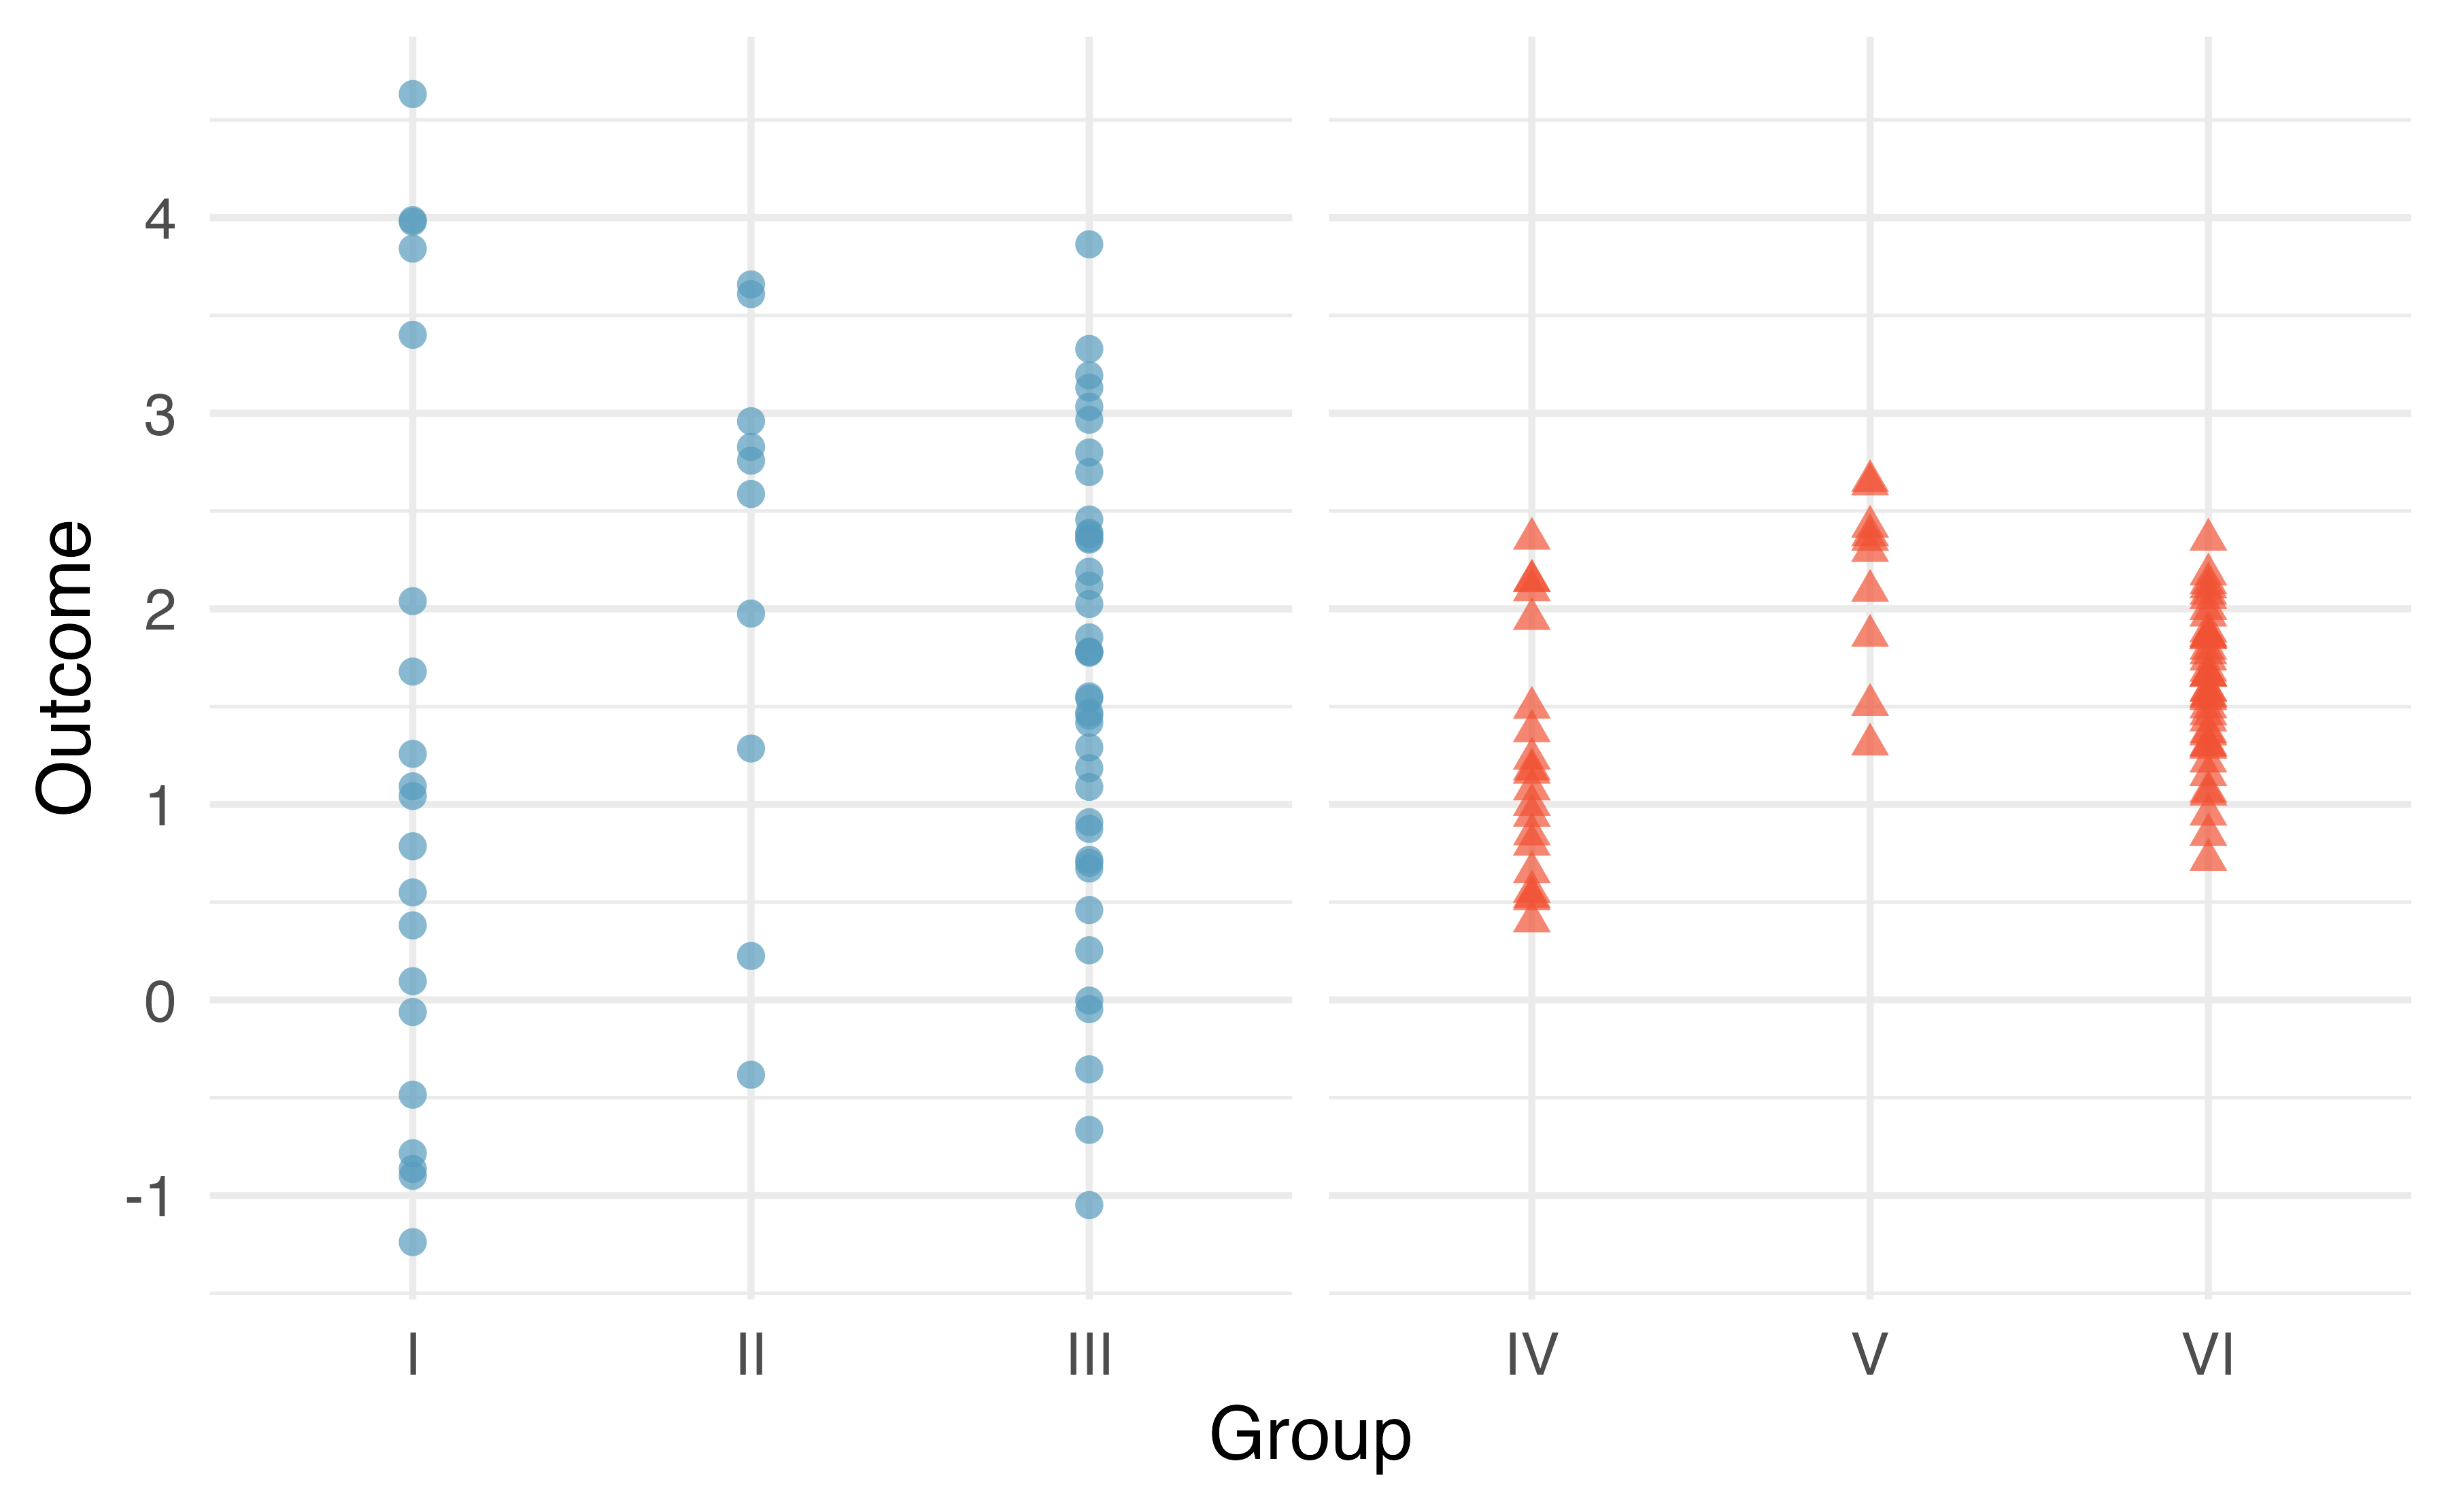 Side-by-side dot plot for the outcomes for six groups. Two sets of groups: first set is comprised of Groups I, II, and III, the second set is comprised of Groups IV, V, and VI.